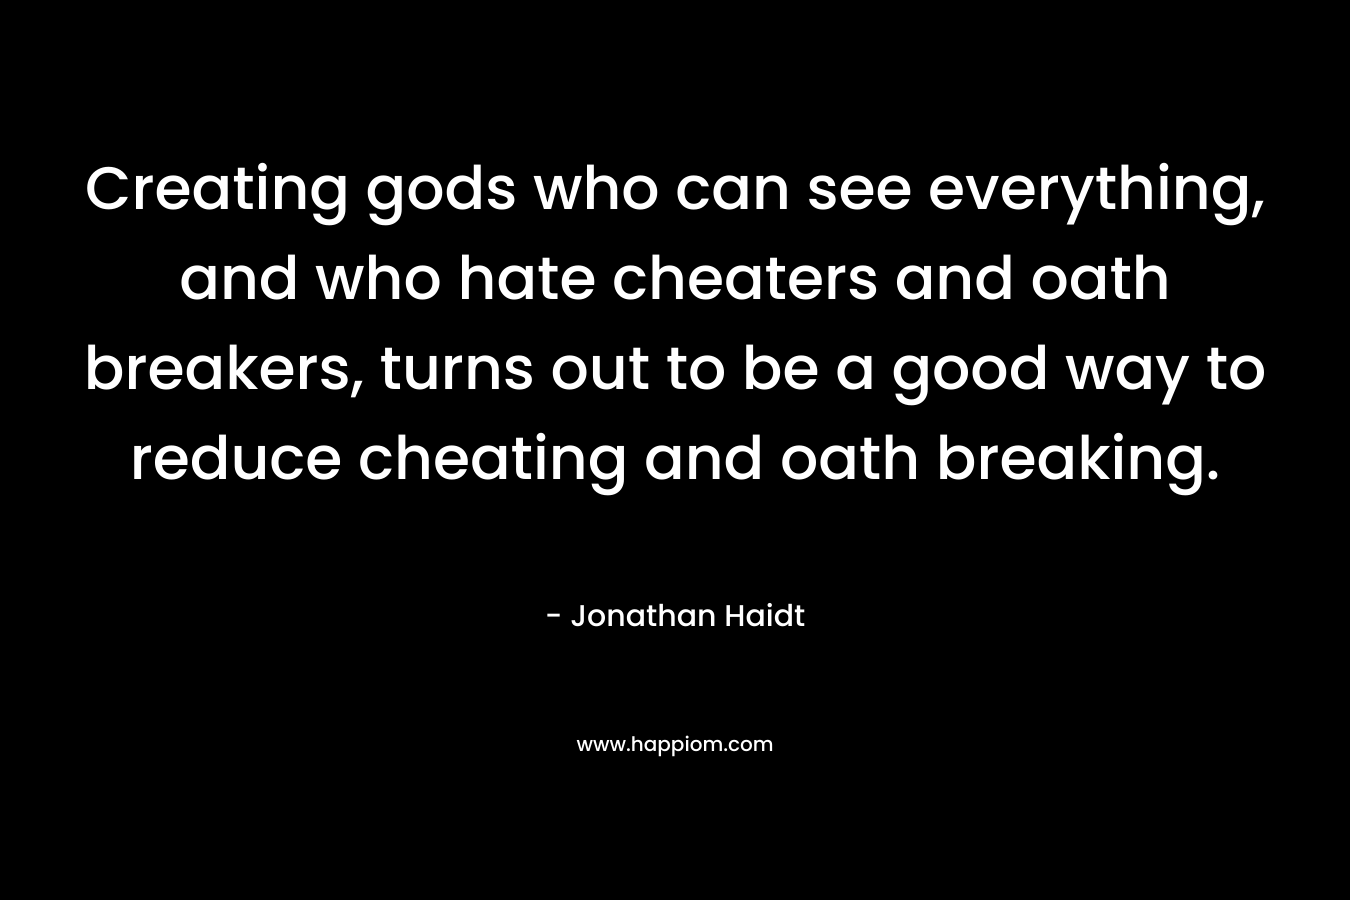 Creating gods who can see everything, and who hate cheaters and oath breakers, turns out to be a good way to reduce cheating and oath breaking. – Jonathan Haidt